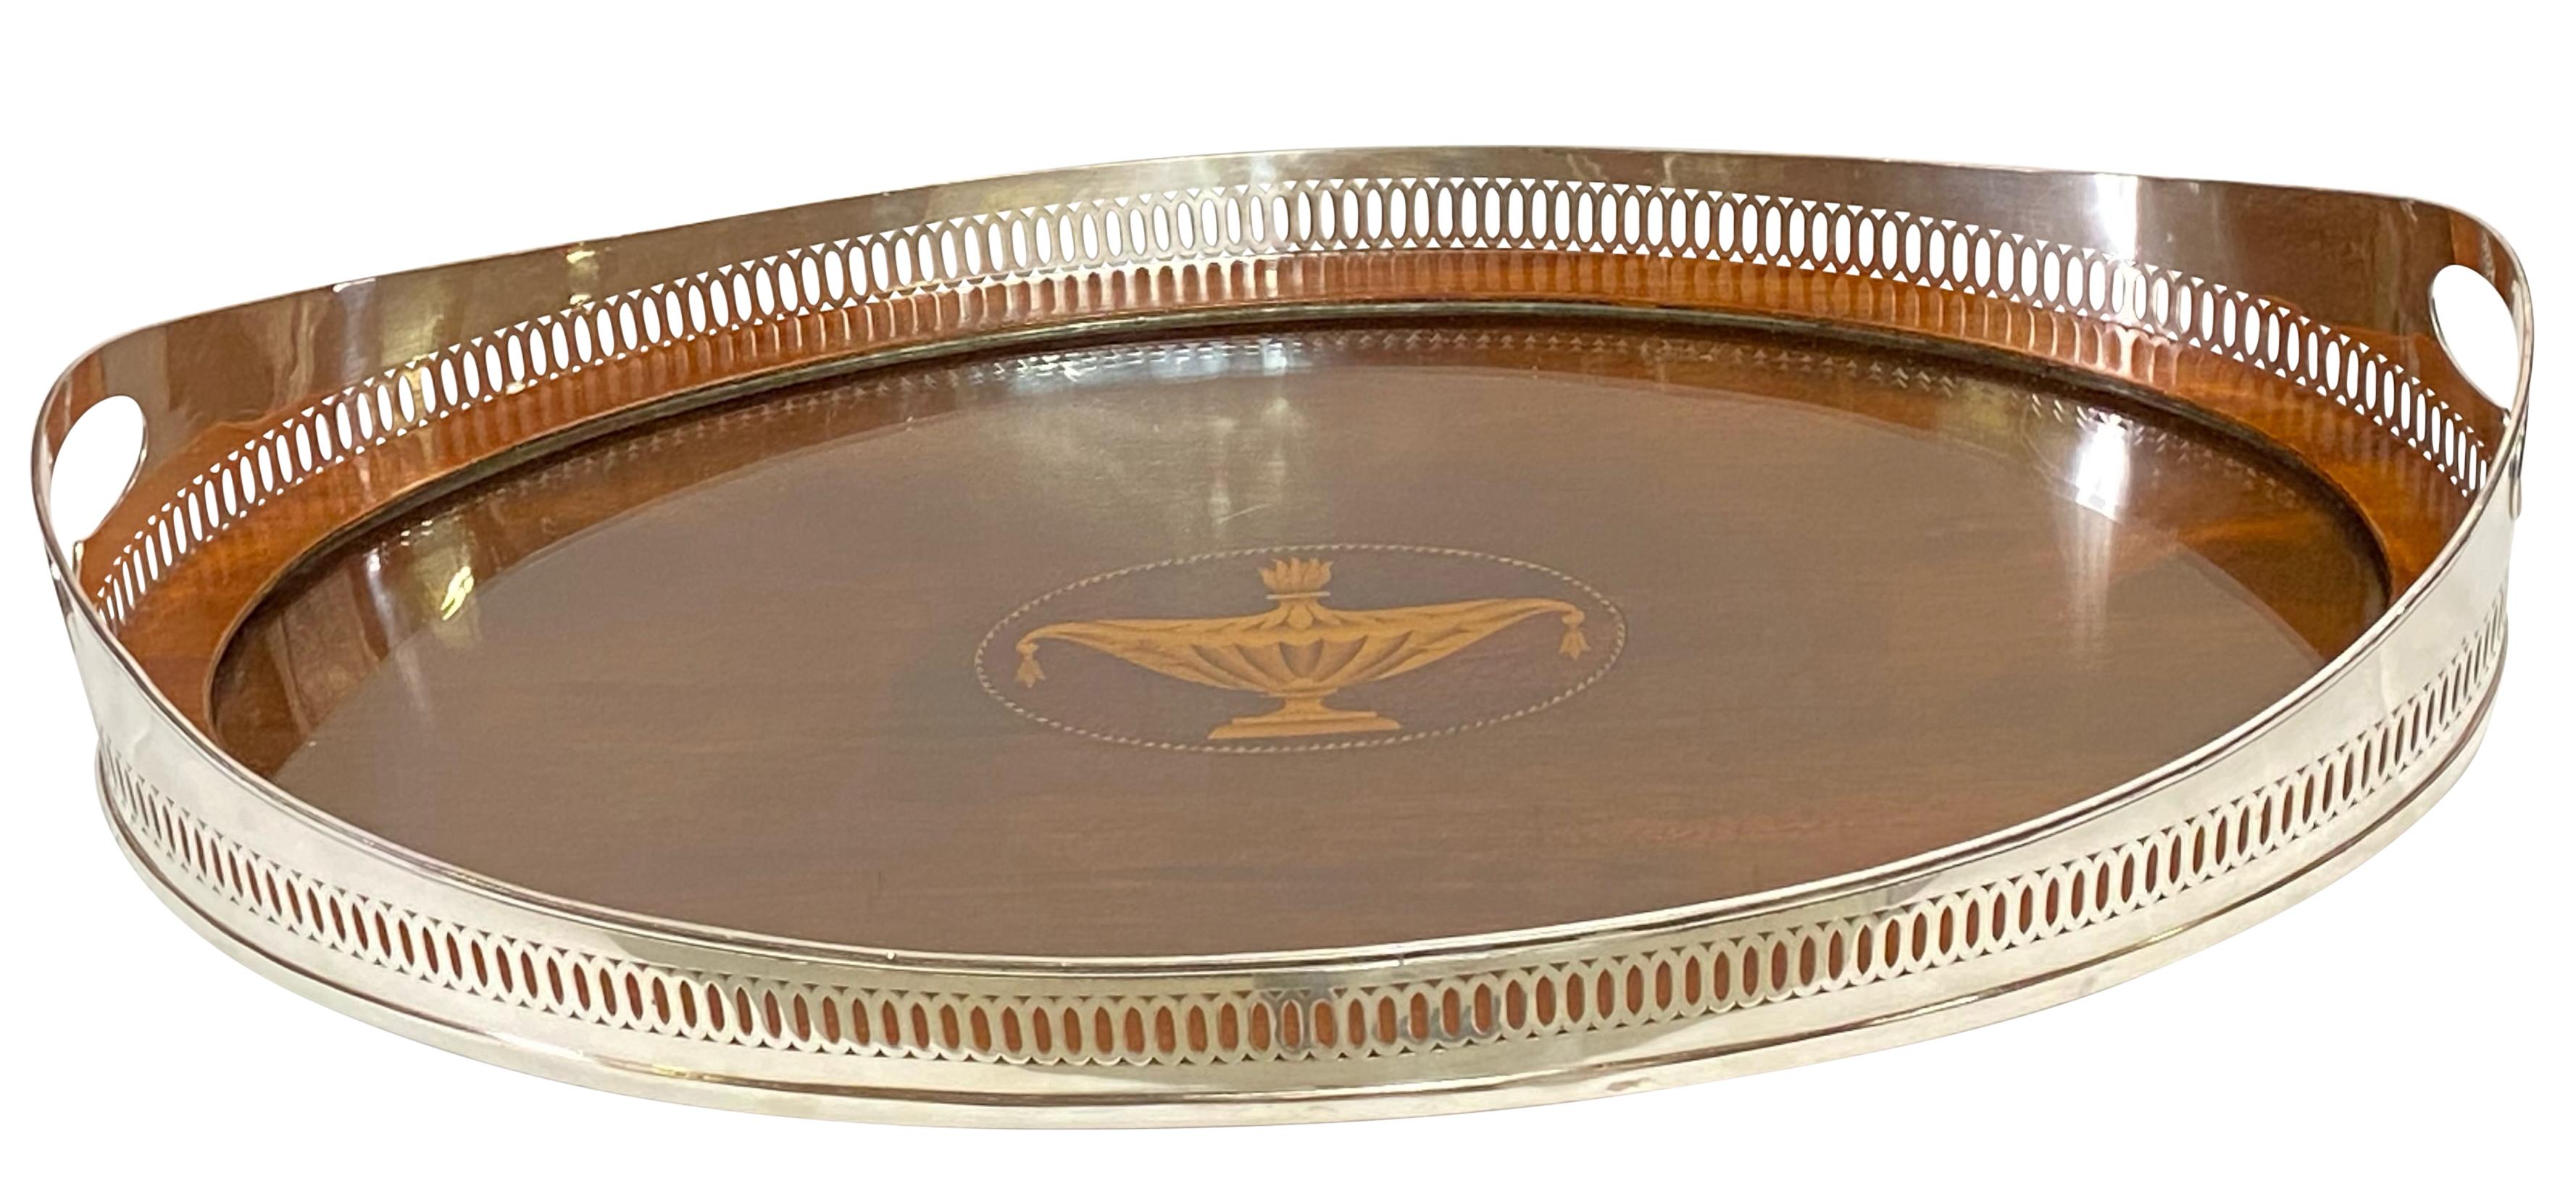 A Sheraton style silver on copper gallery serving tray with glass insert over mahogany center, and having a satinwood inlay center urn decoration.
England, early 20th century. 
Excellent antique condition.